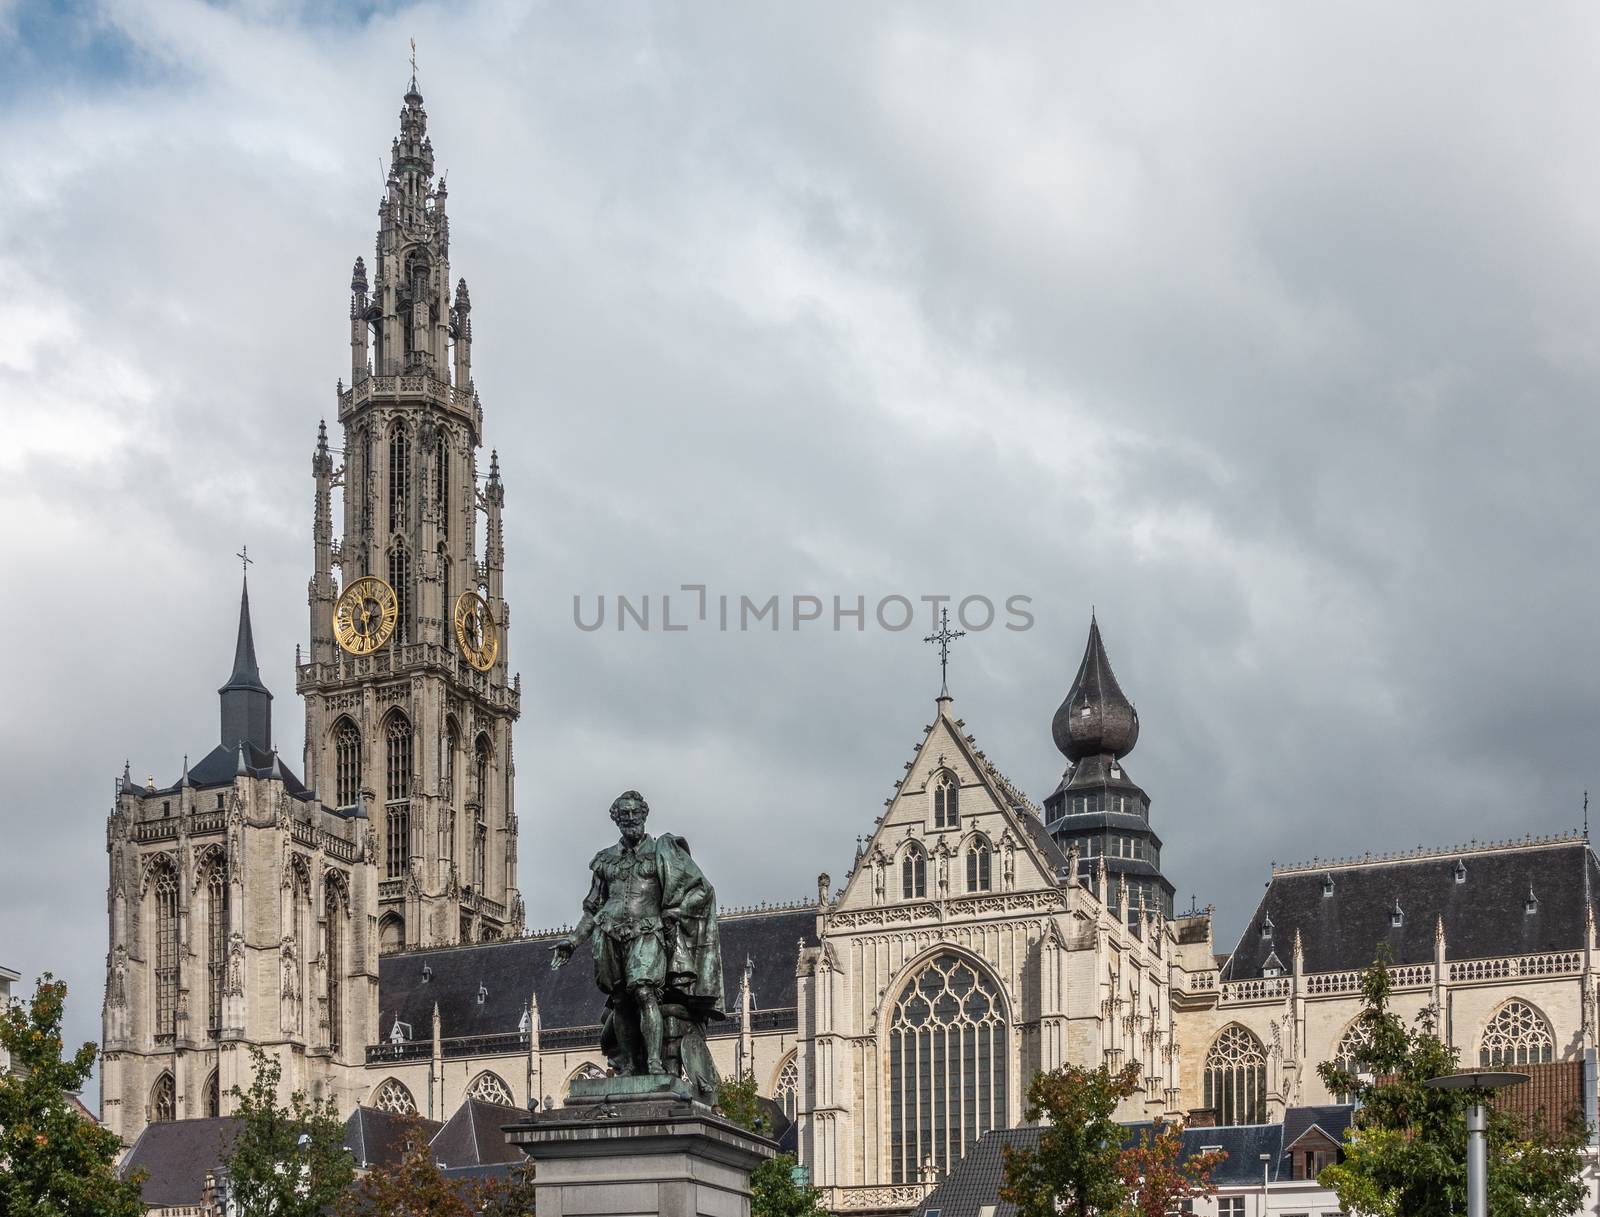 Rubens Statue and Cathedral of Our Lady, Antwerp Belgium. by Claudine